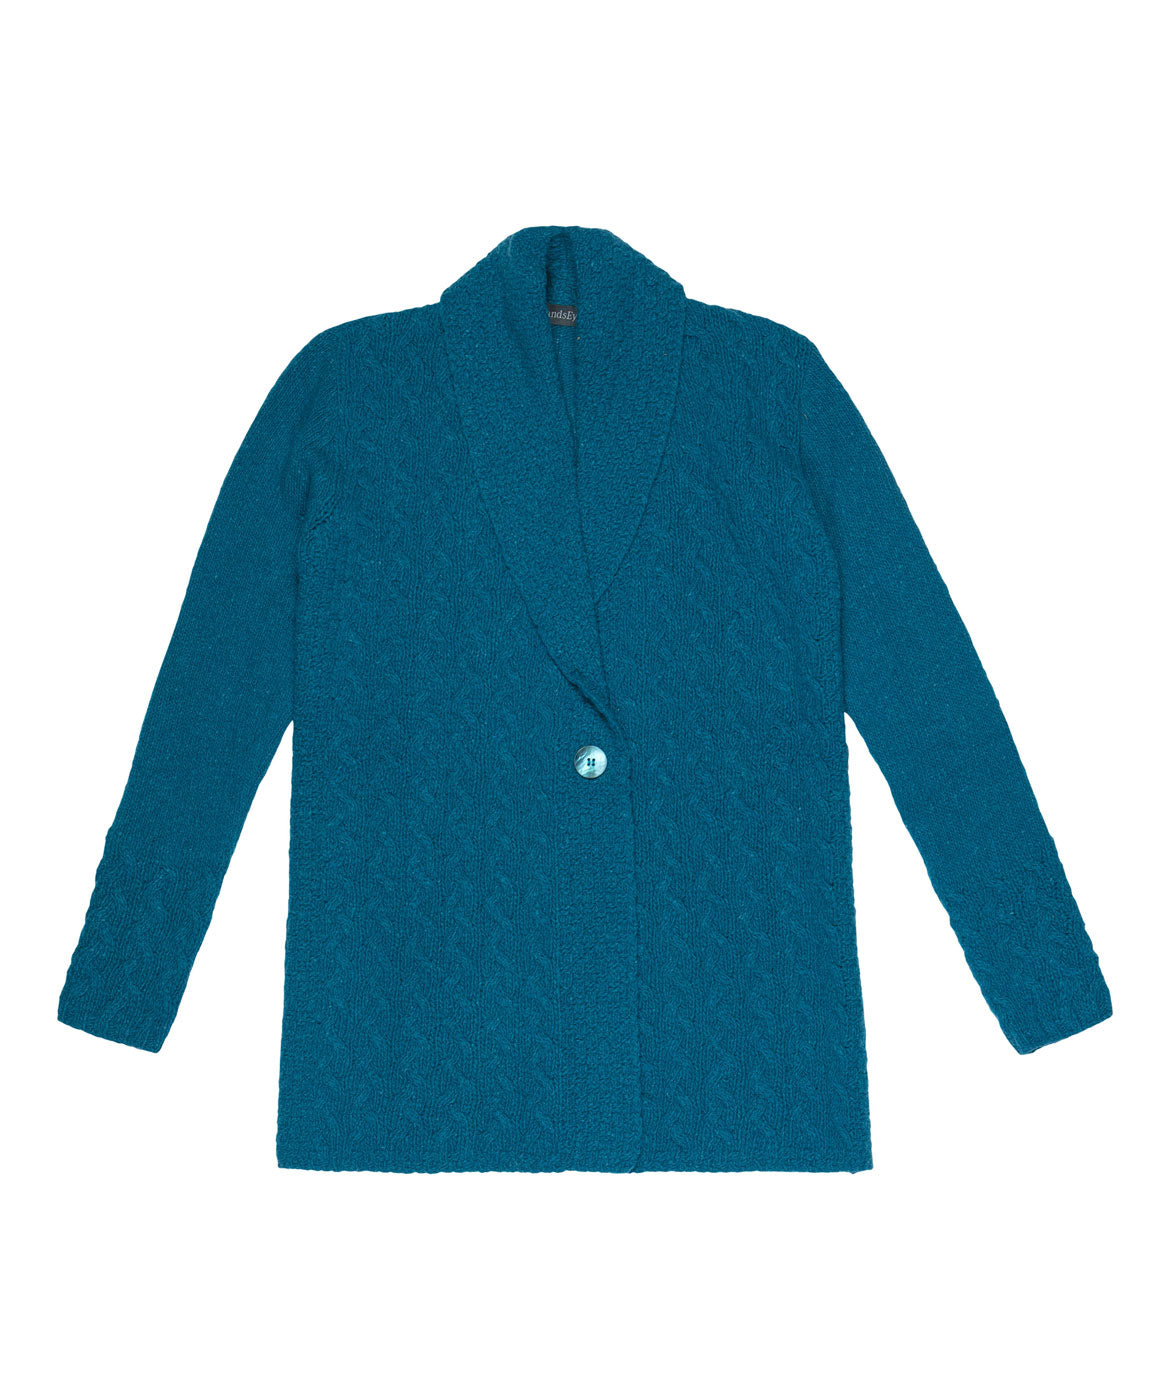 IrelandsEye Knitwear Adare Cable One Button Cardigan Teal Harbour